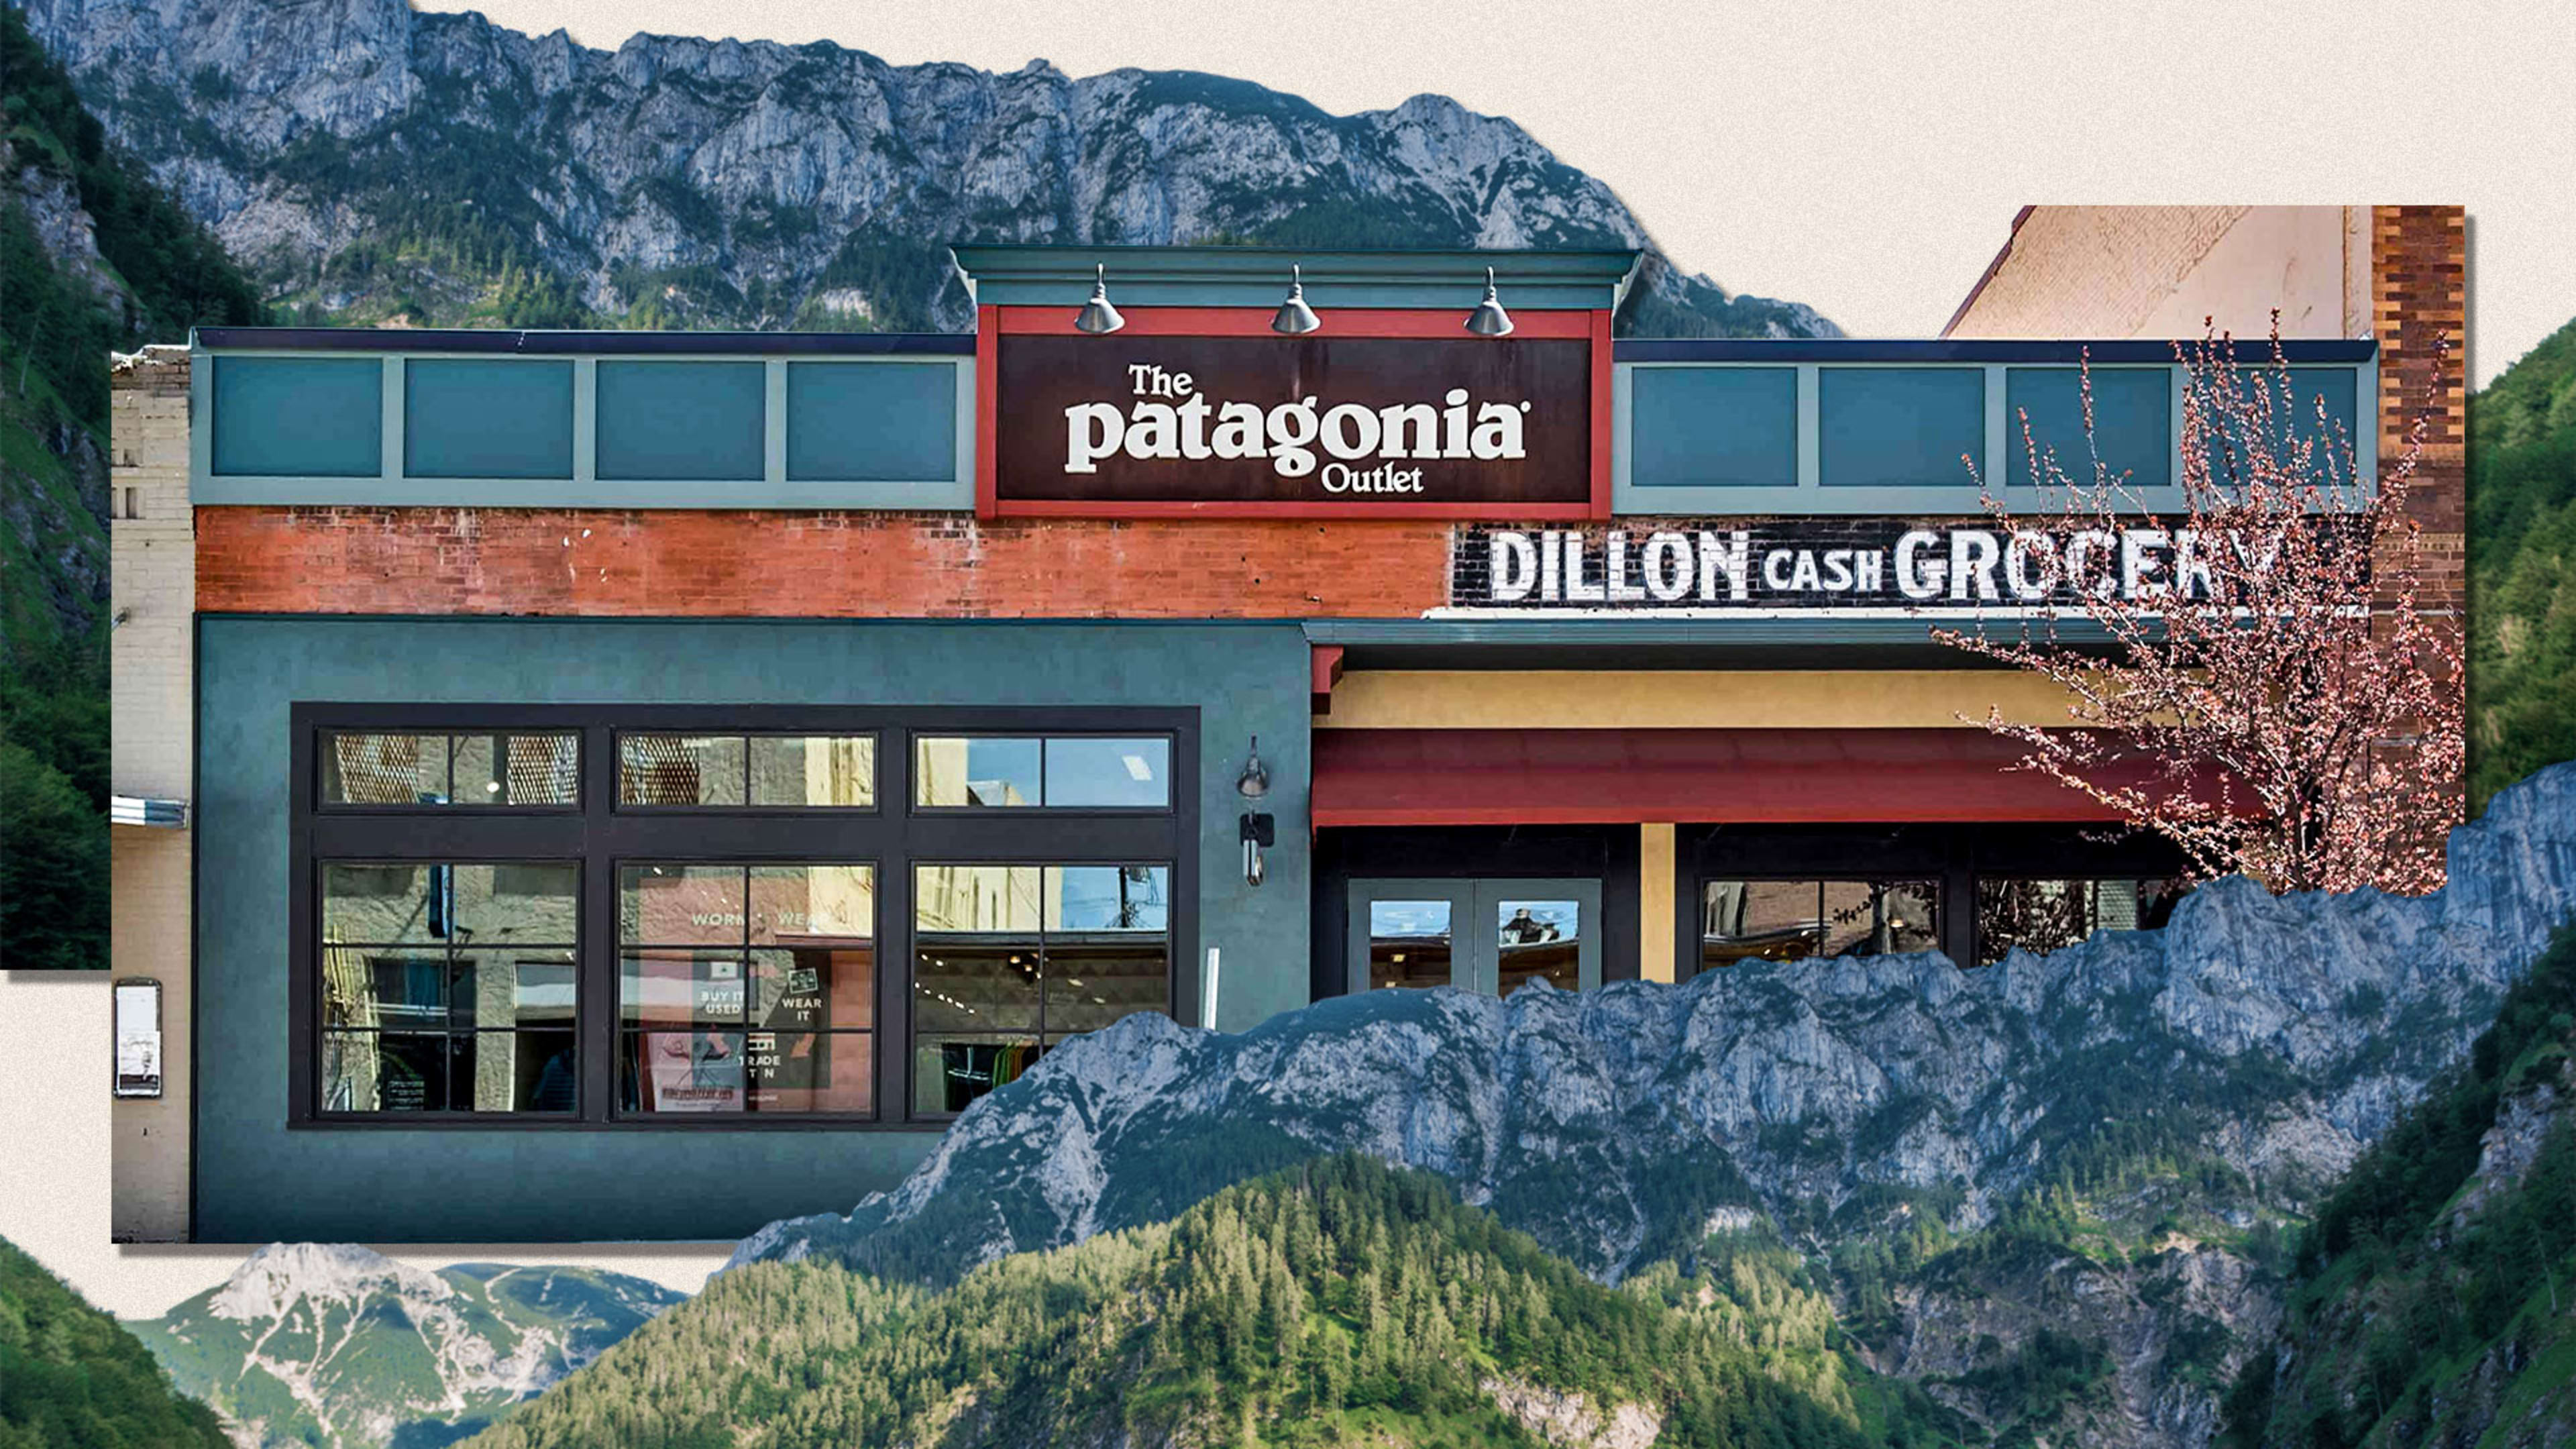 Patagonia outlet store in Dillon, Montana, was a gamble that paid off